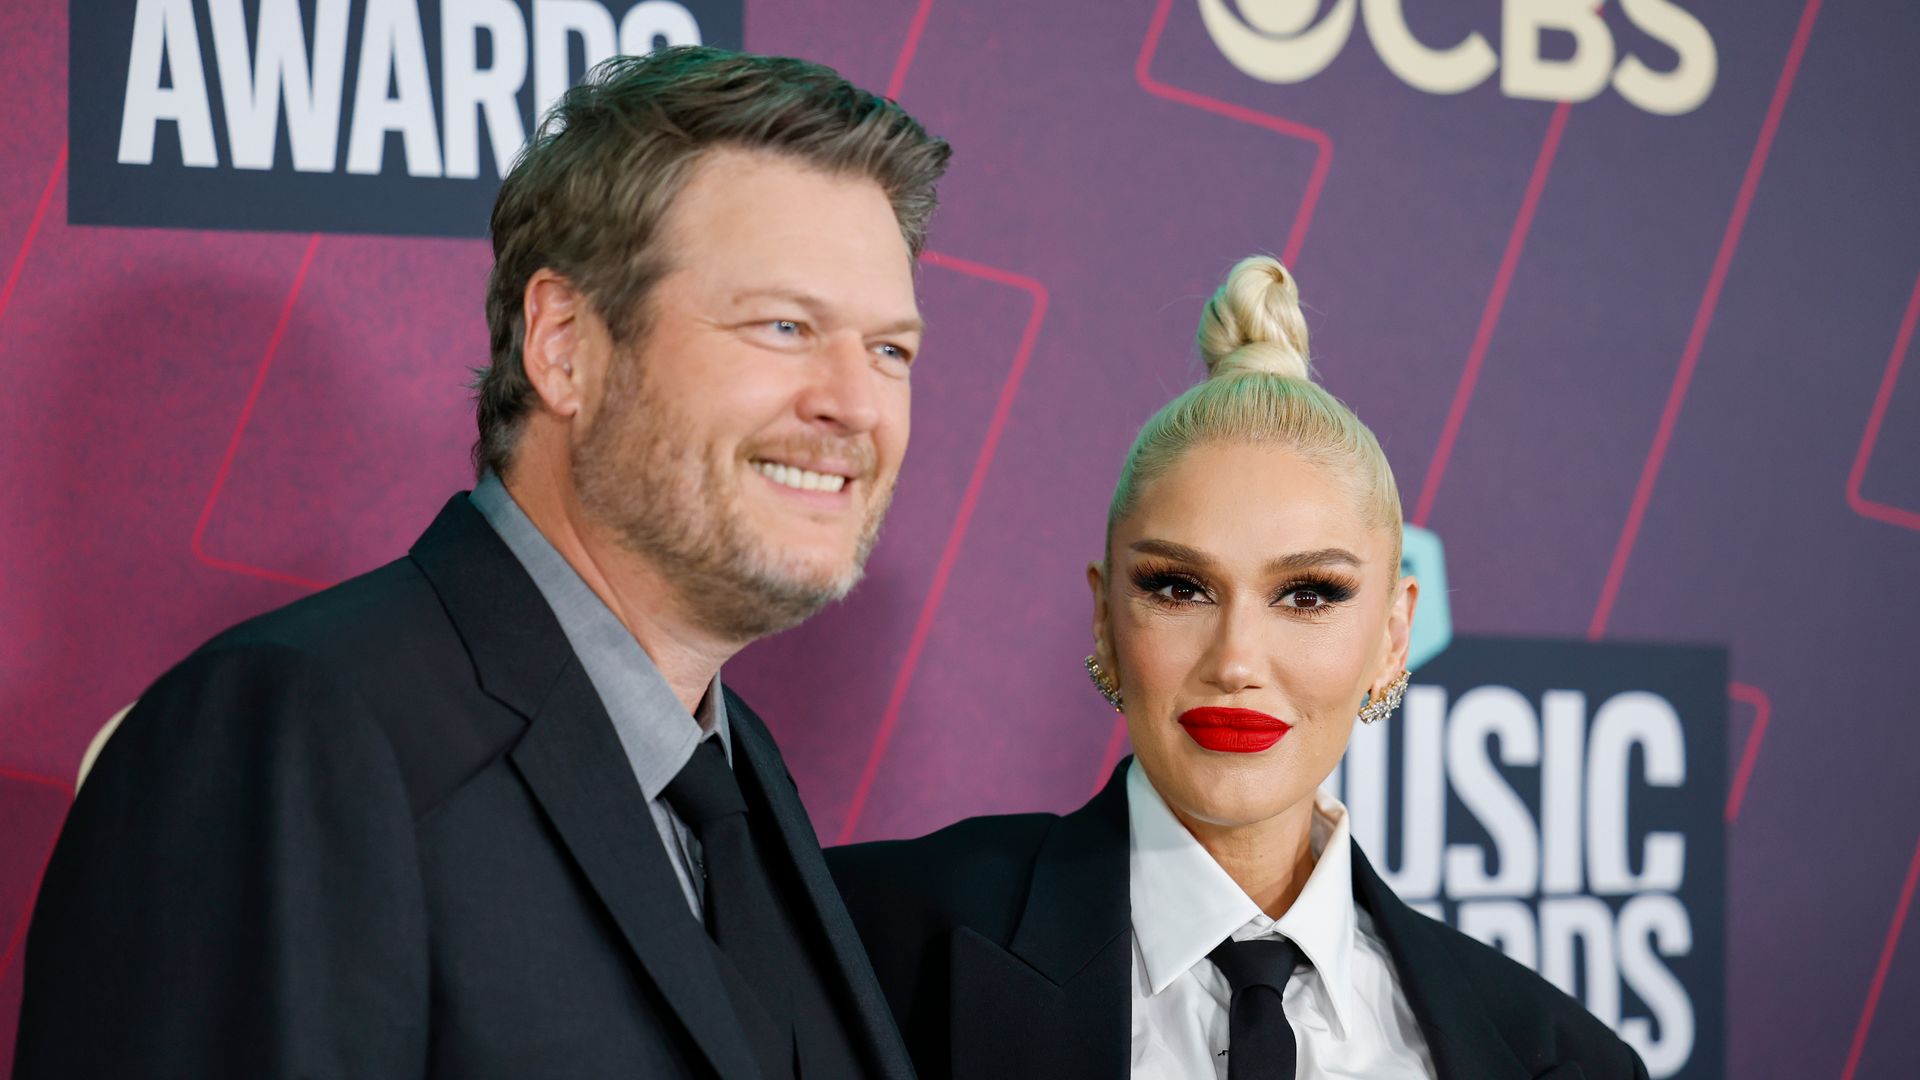 Blake Shelton and Gwen Stefani attend the 2023 CMT Music Awards at Moody Center on April 02, 2023 in Austin, Texas.